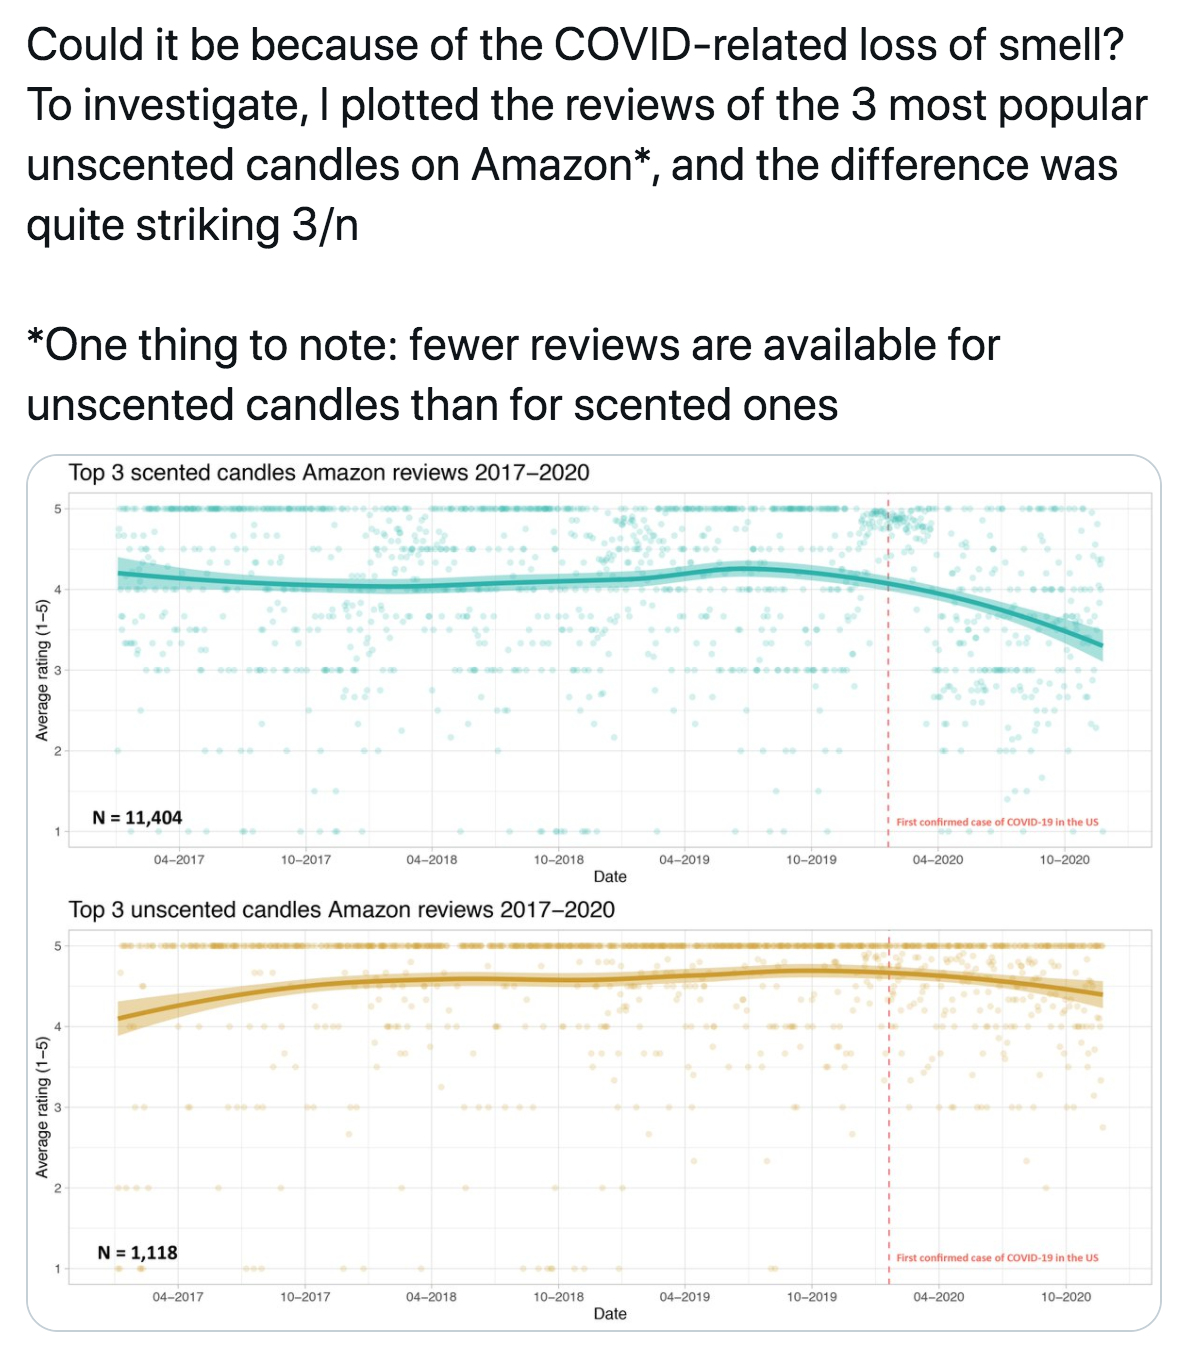 document - Could it be because of the Covidrelated loss of smell? To investigate, I plotted the reviews of the 3 most popular unscented candles on Amazon", and the difference was quite striking 3n One thing to note fewer reviews are available for unscente